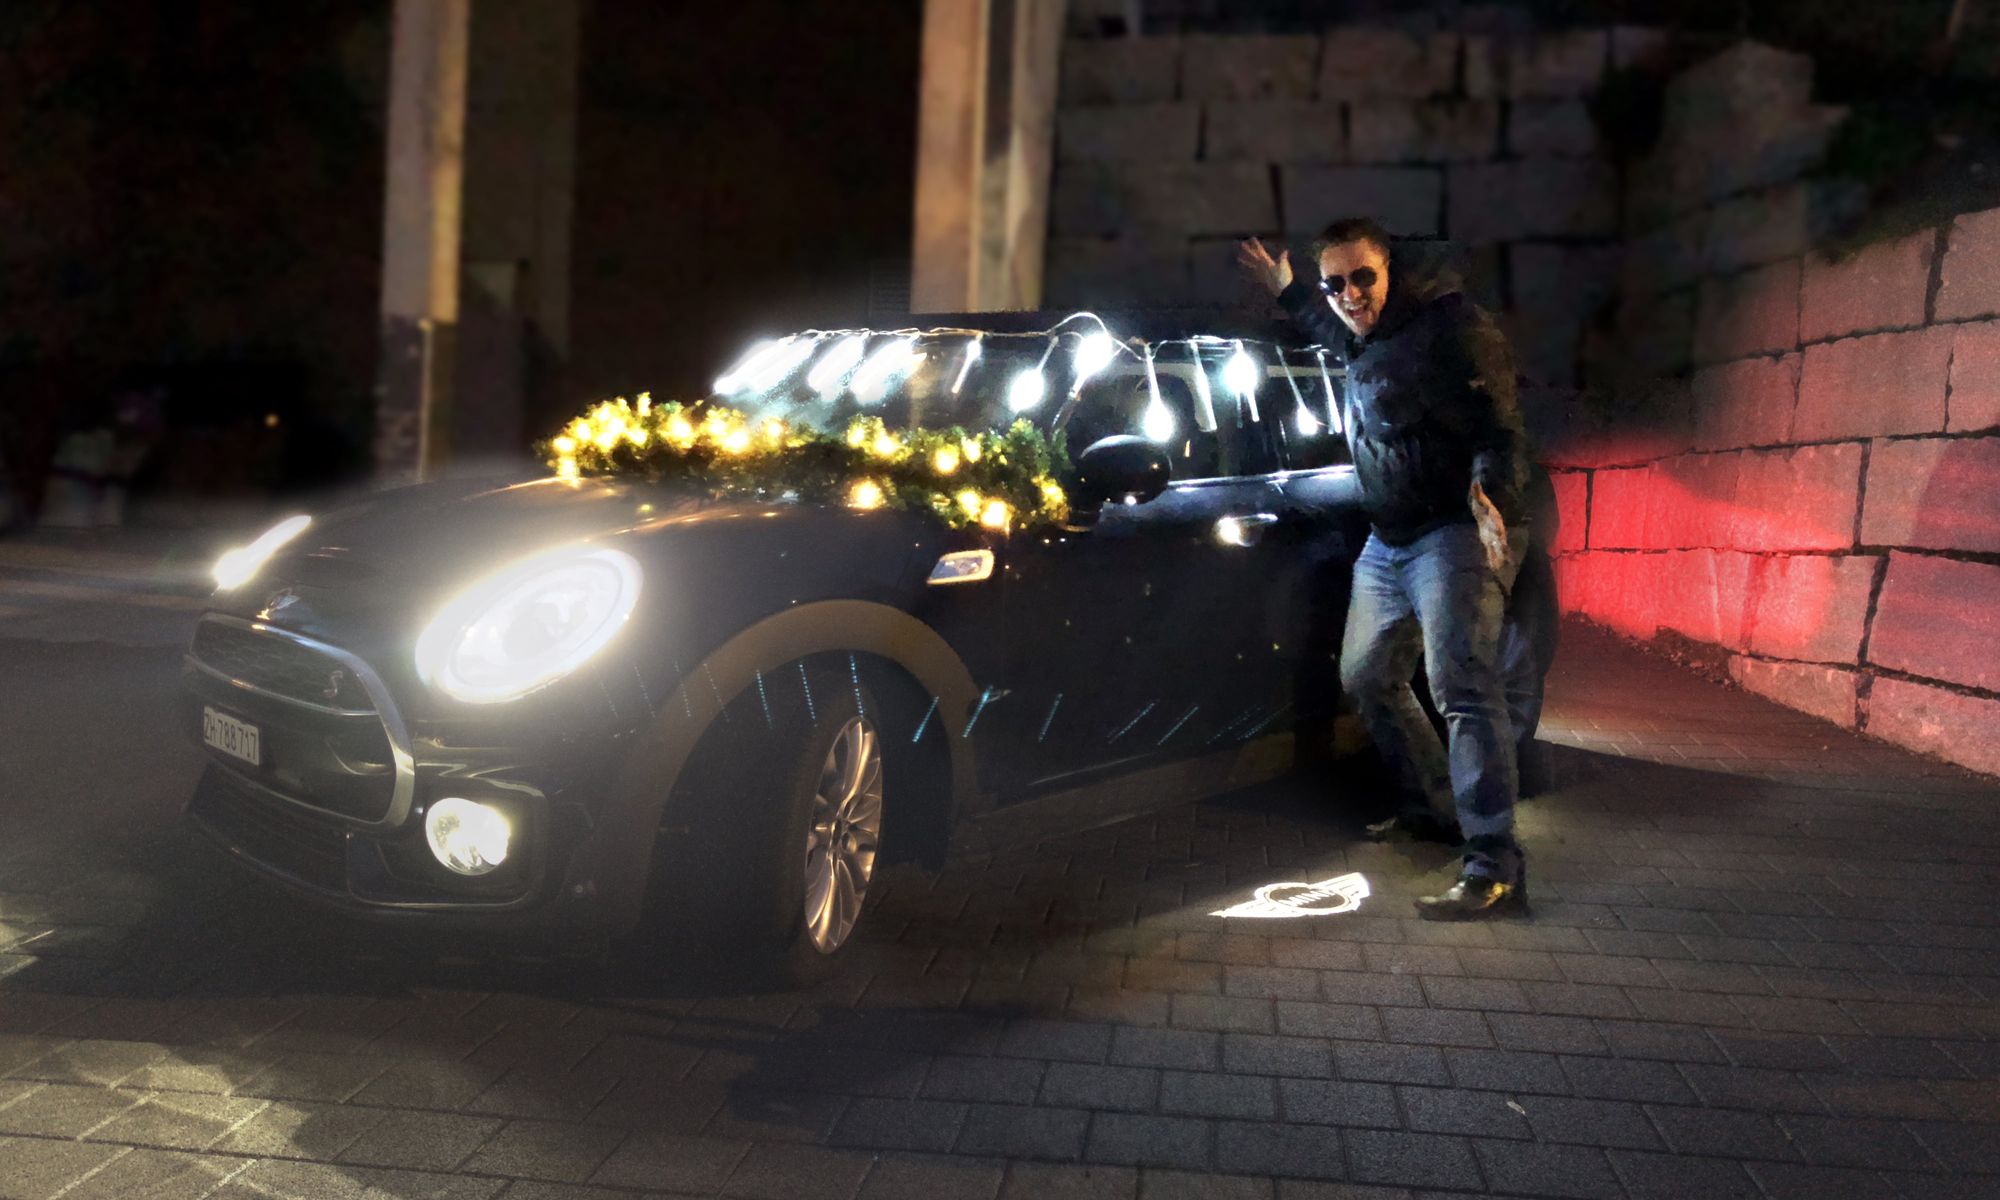 Christmas Lights on a MINI Clubman, by Renato Mitra